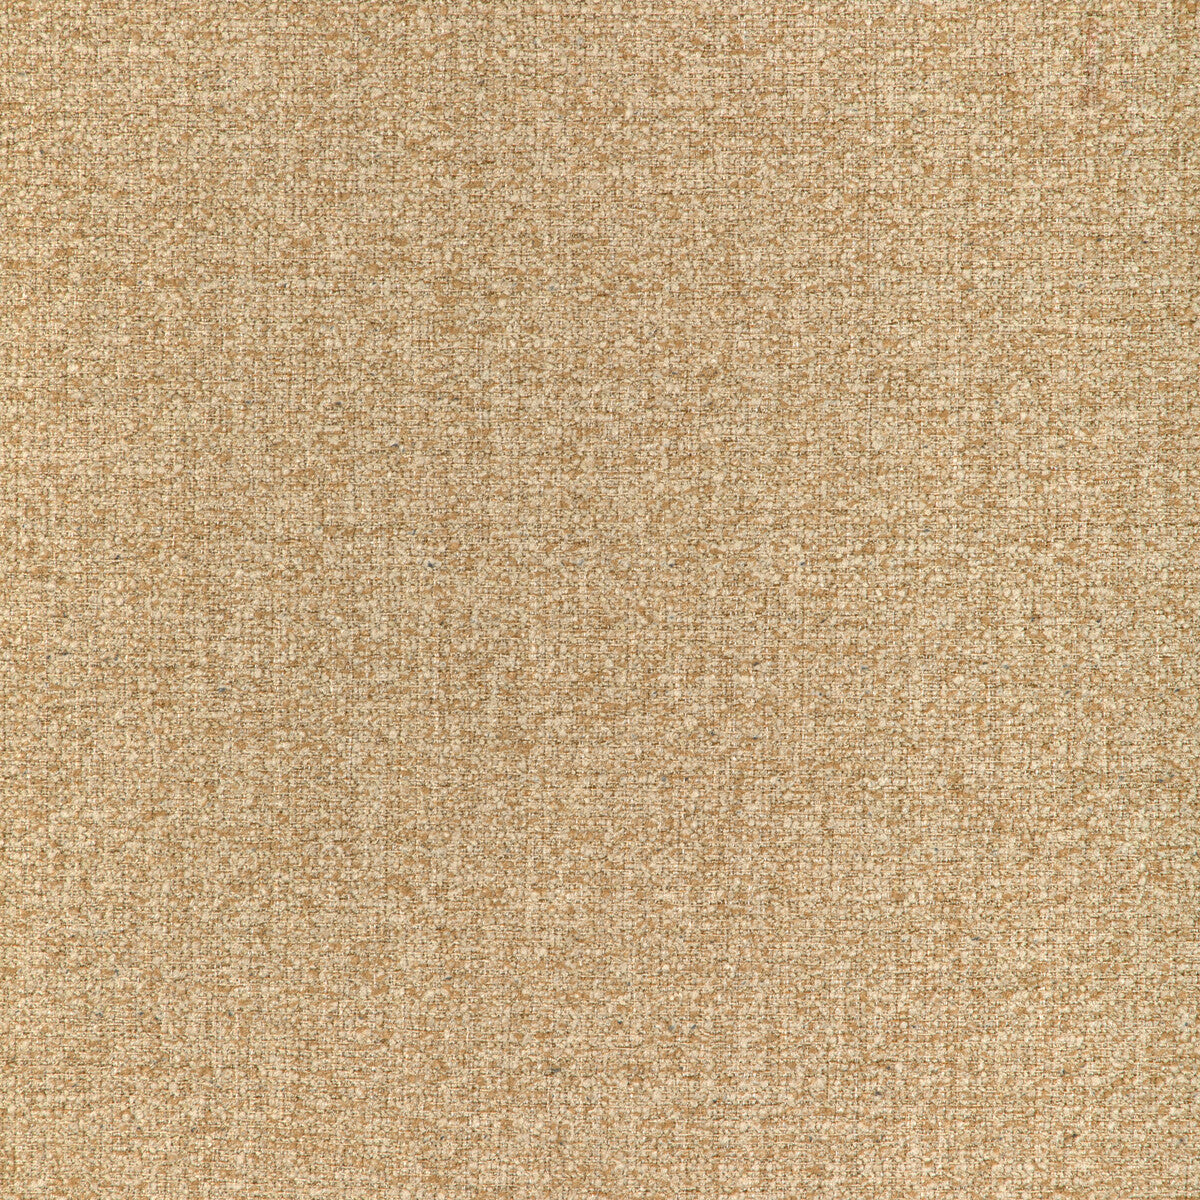 Kravet Design fabric in 37185-16 color - pattern 37185.16.0 - by Kravet Design in the Woven Colors collection